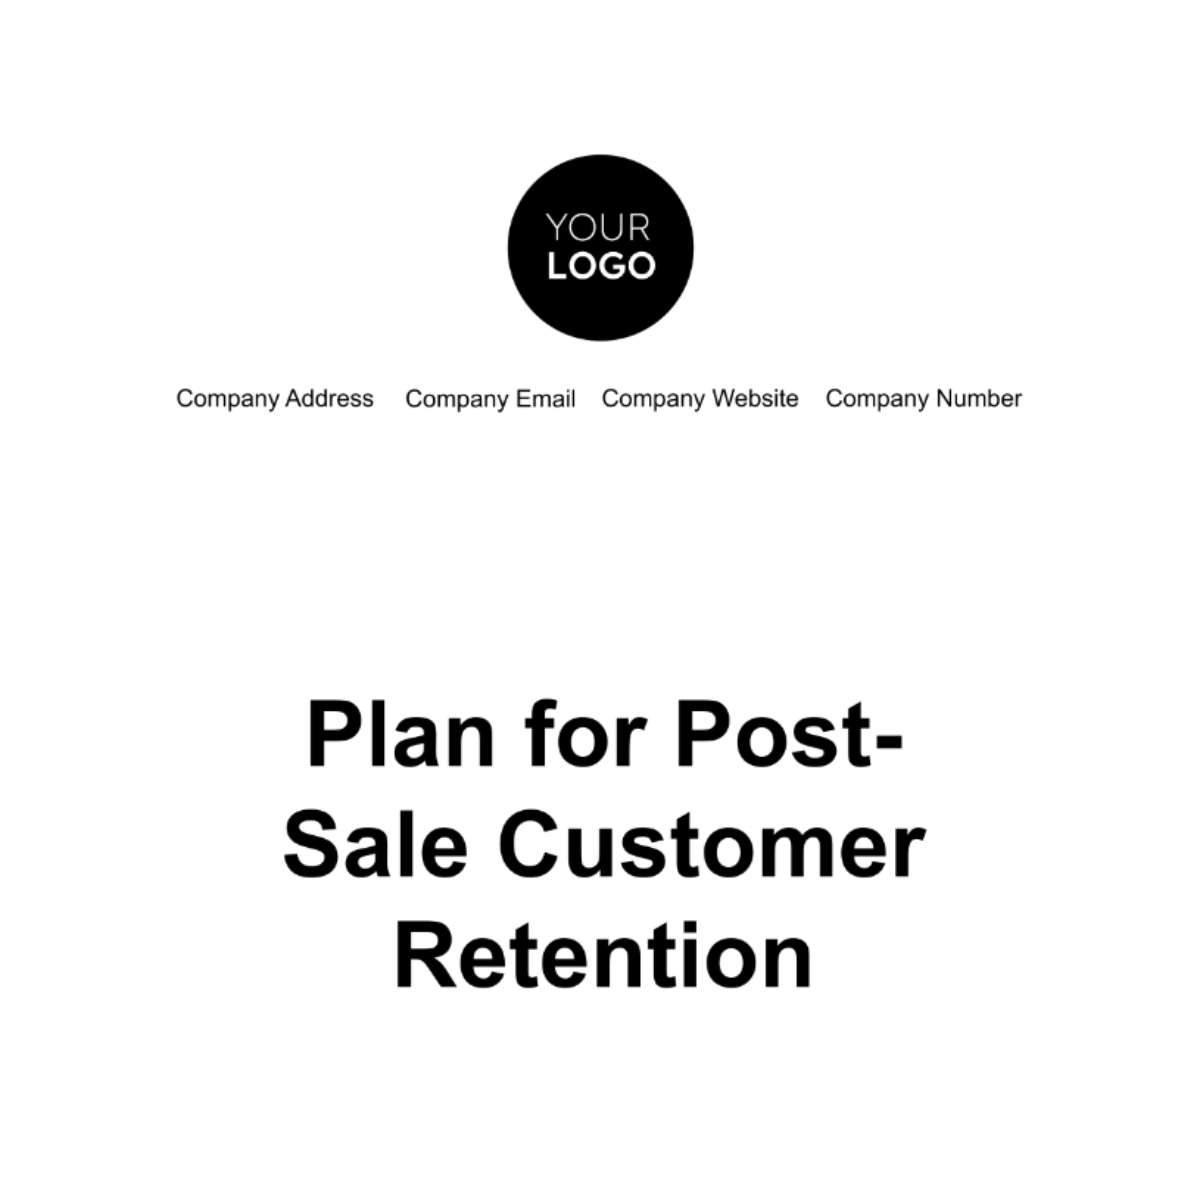 Plan for Post-Sale Customer Retention Template